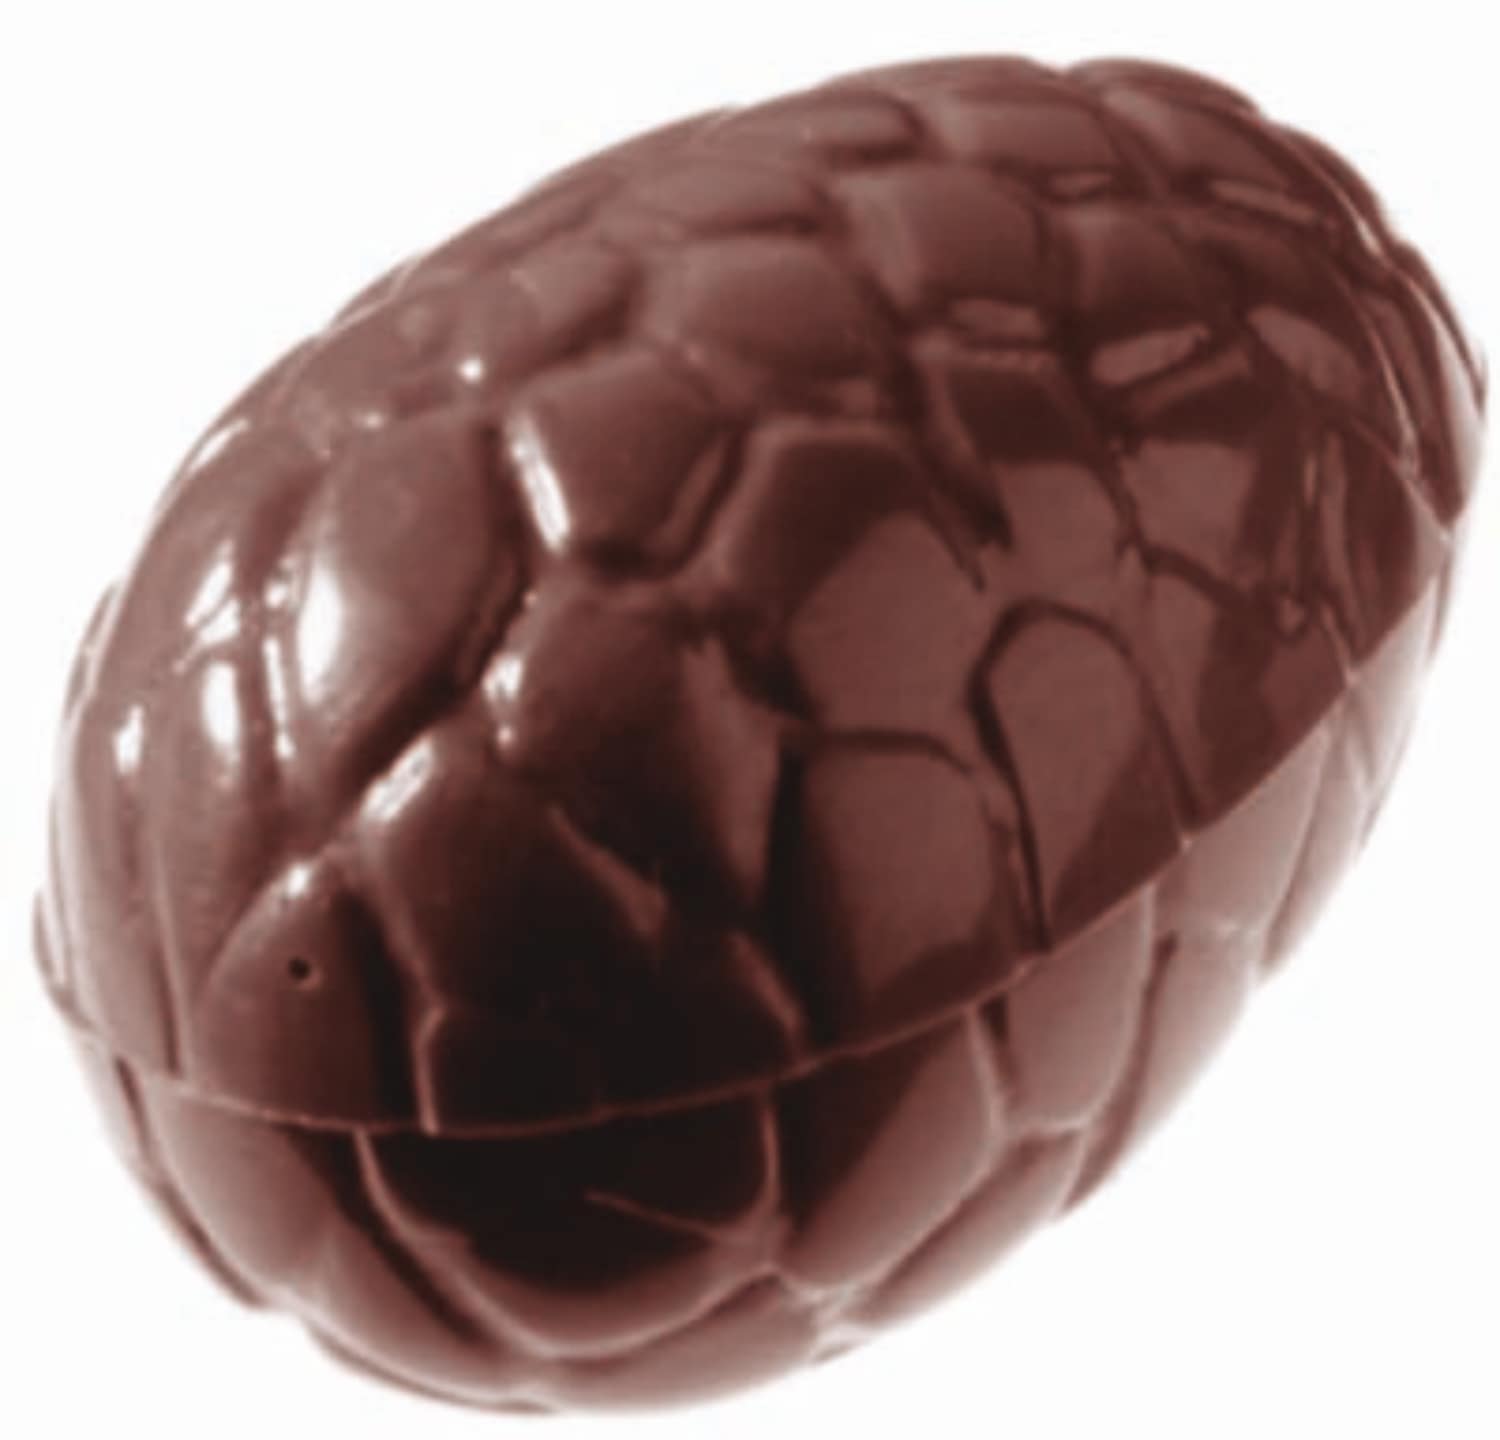 Chocolate mould "Easter egg" 421516 421516